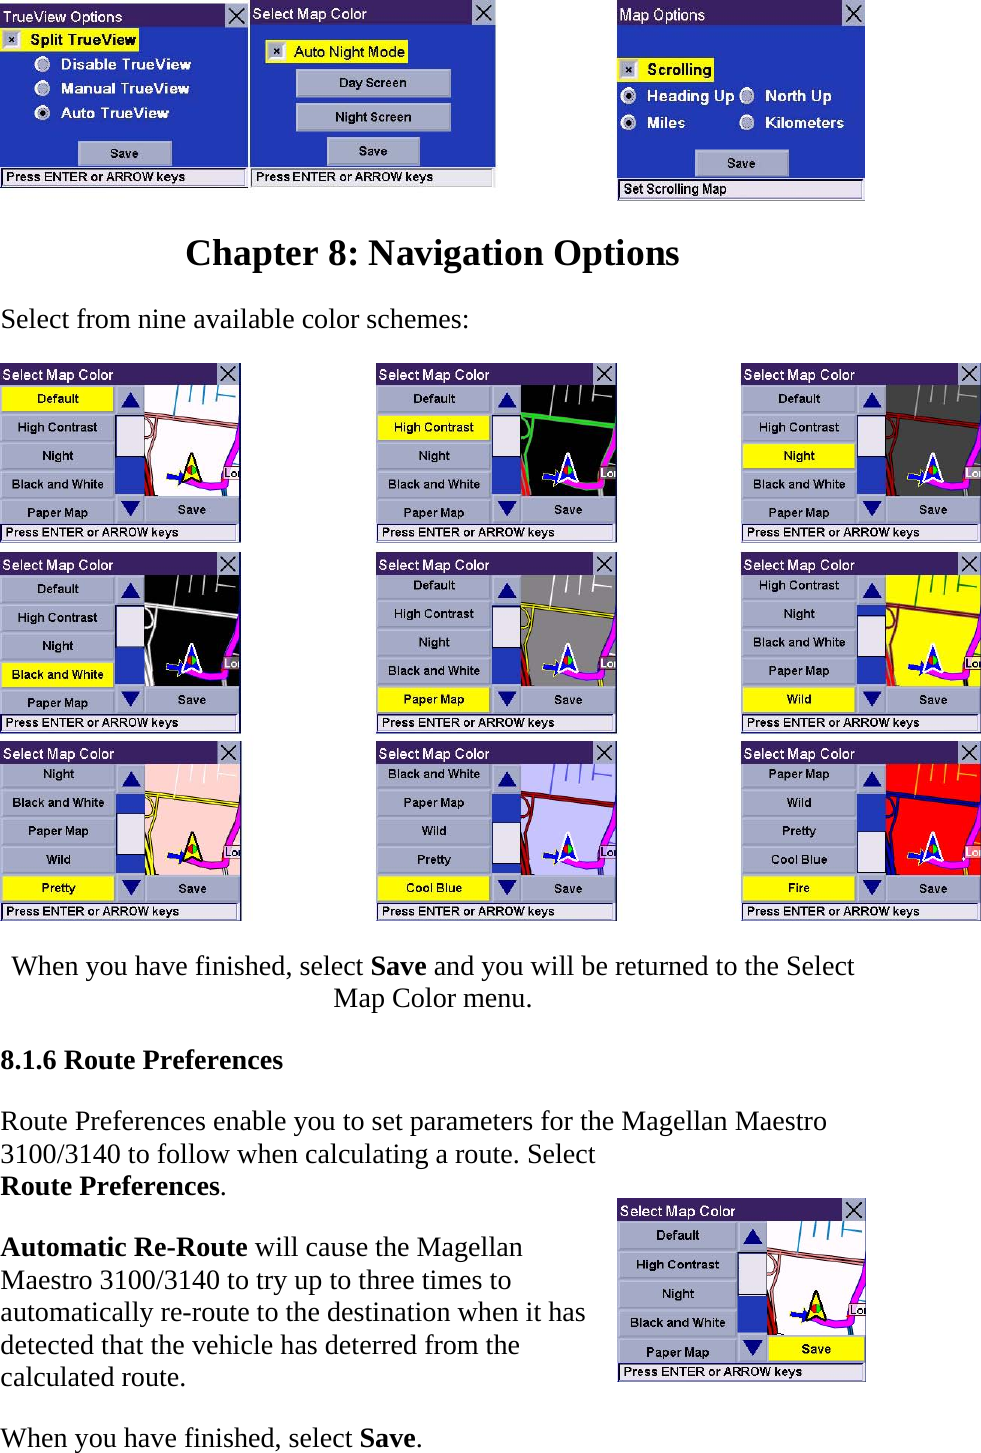  Chapter 8: Navigation Options  Select from nine available color schemes:   When you have finished, select Save and you will be returned to the Select Map Color menu.  8.1.6 Route Preferences  Route Preferences enable you to set parameters for the Magellan Maestro 3100/3140 to follow when calculating a route. Select Route Preferences.  Automatic Re-Route will cause the Magellan Maestro 3100/3140 to try up to three times to automatically re-route to the destination when it has detected that the vehicle has deterred from the calculated route.  When you have finished, select Save.  